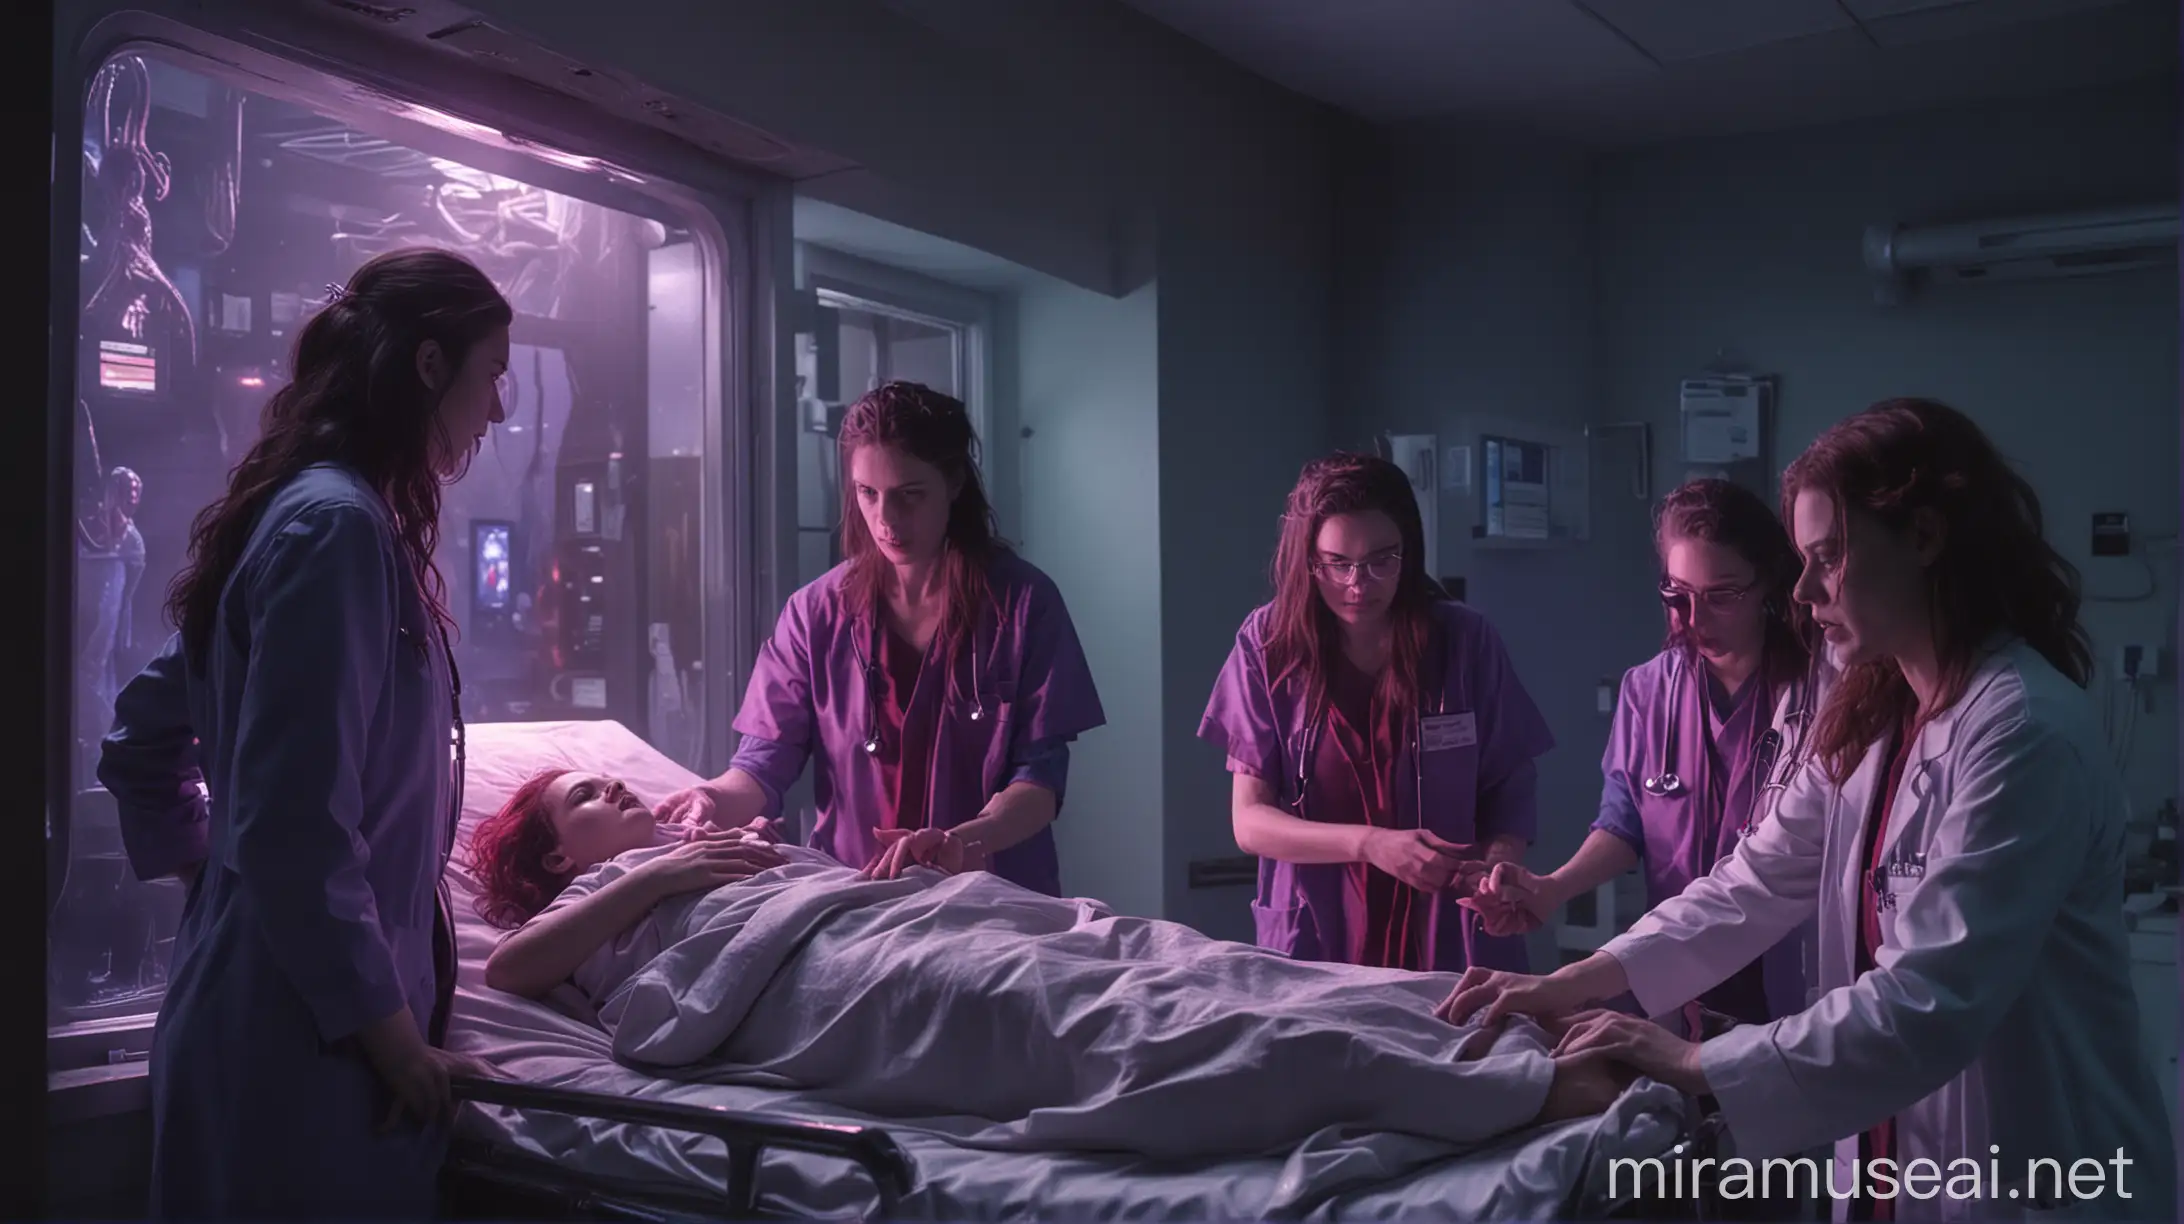 Female Doctors Assisting in Birth of Lovecraftian Being in City Hospital